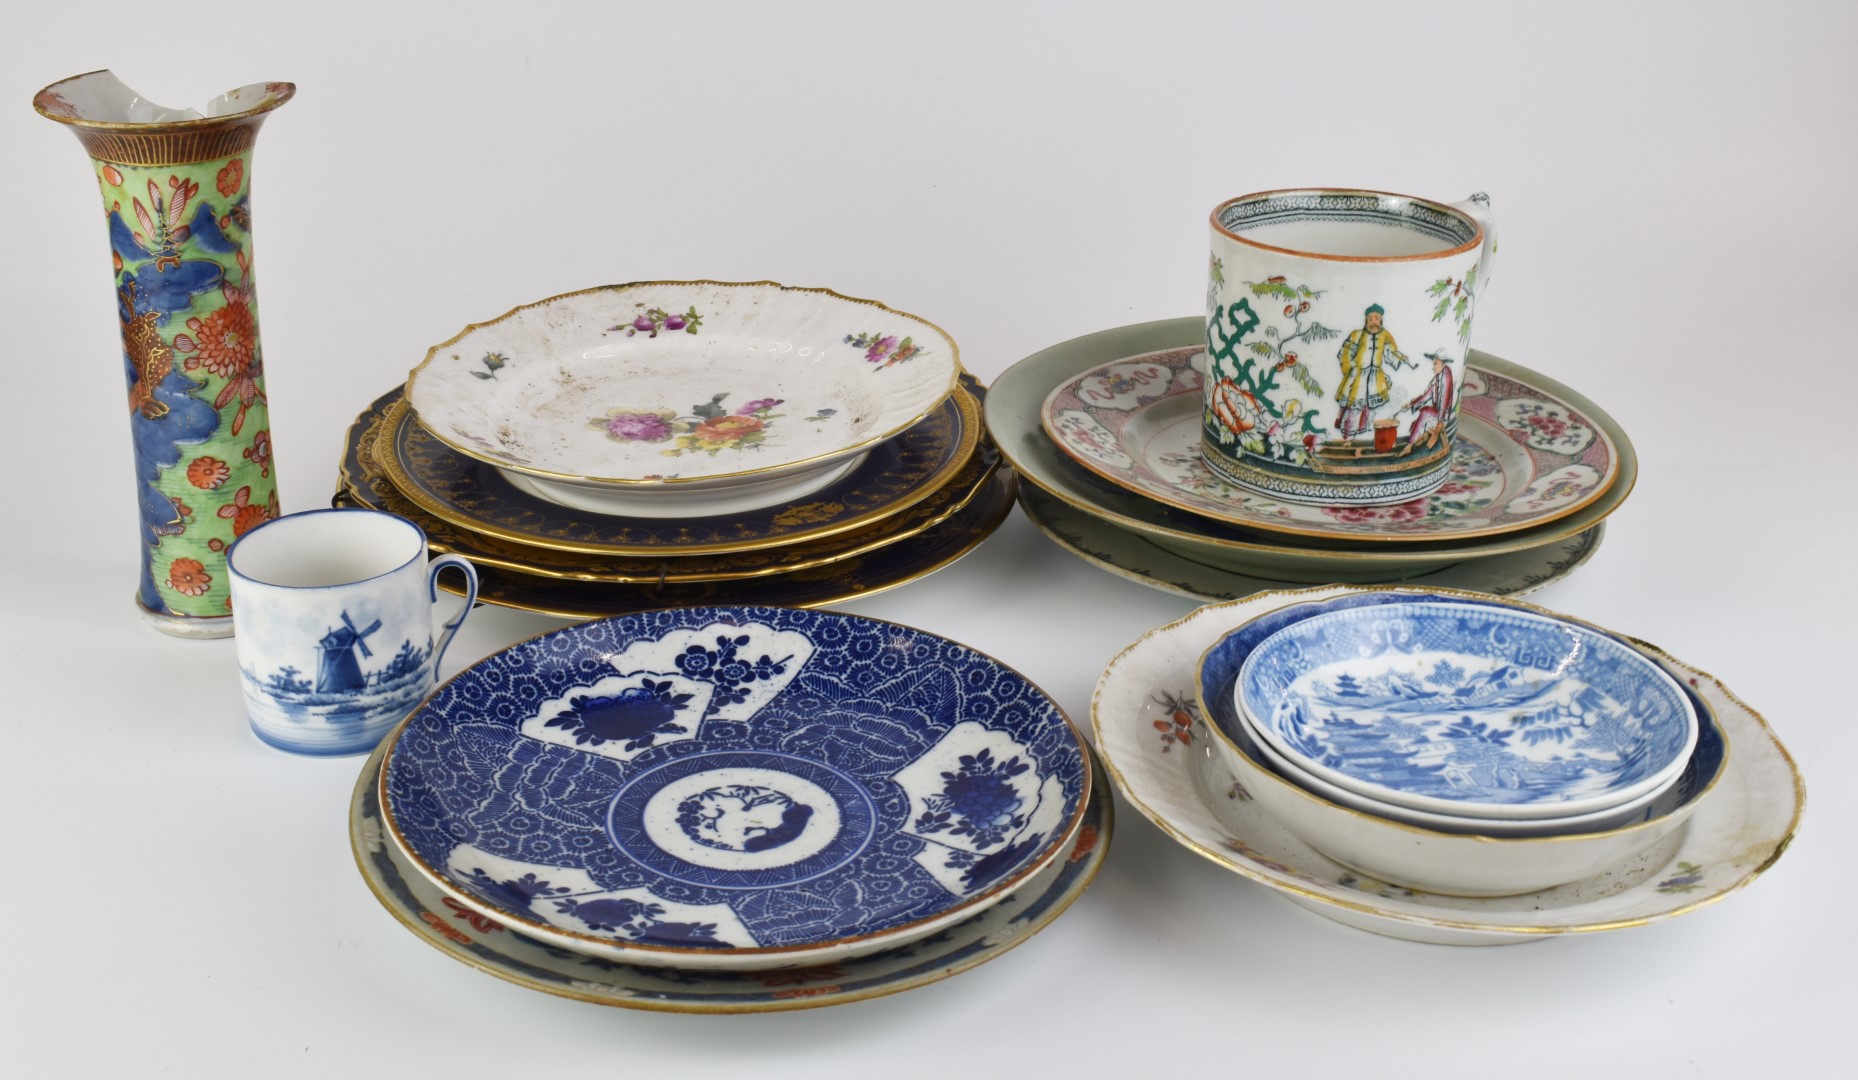 Two Copenhagen shallow dishes decorated with flowers, Chinese export porcelain, Royal Worcester